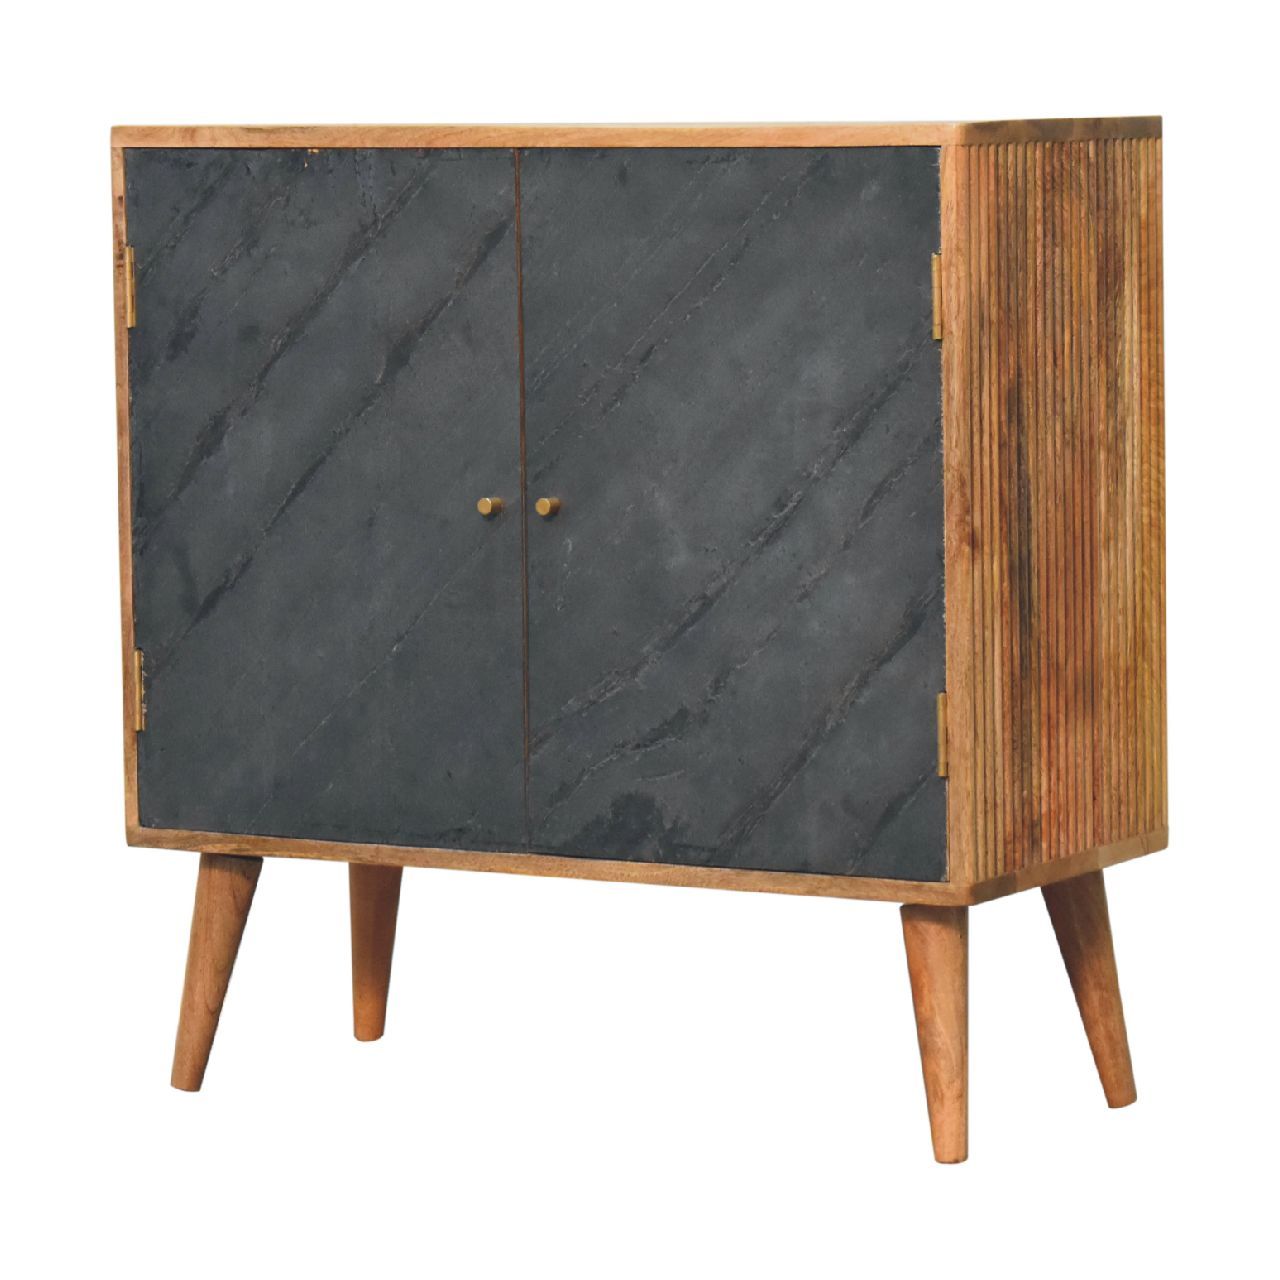 Slade Cabinet - Stone Gray Solid Wood